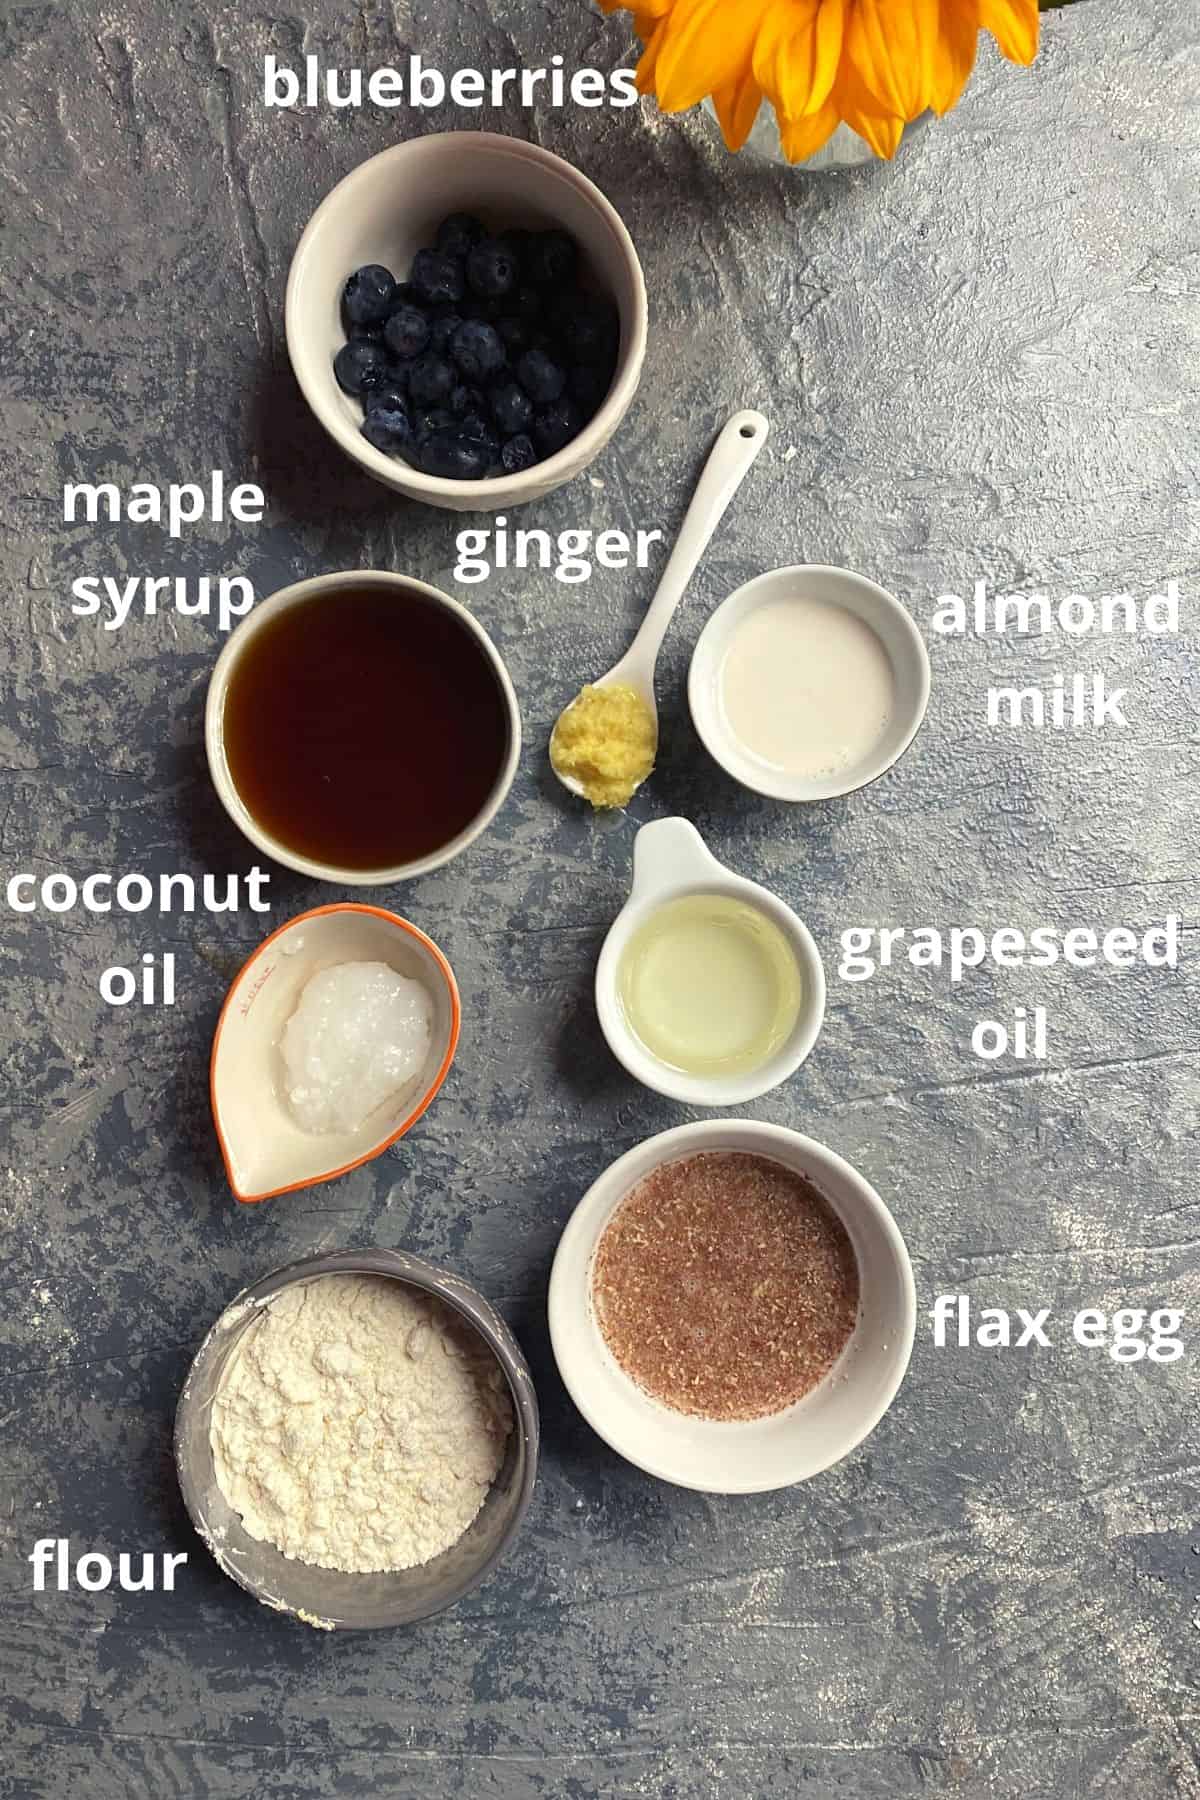 Overhead view of blueberry cornbread muffin ingredients. Blueberries, Maple Syrup, Ginger. Coconut oil, grapeseed oil, flax egg, flour, almond milk